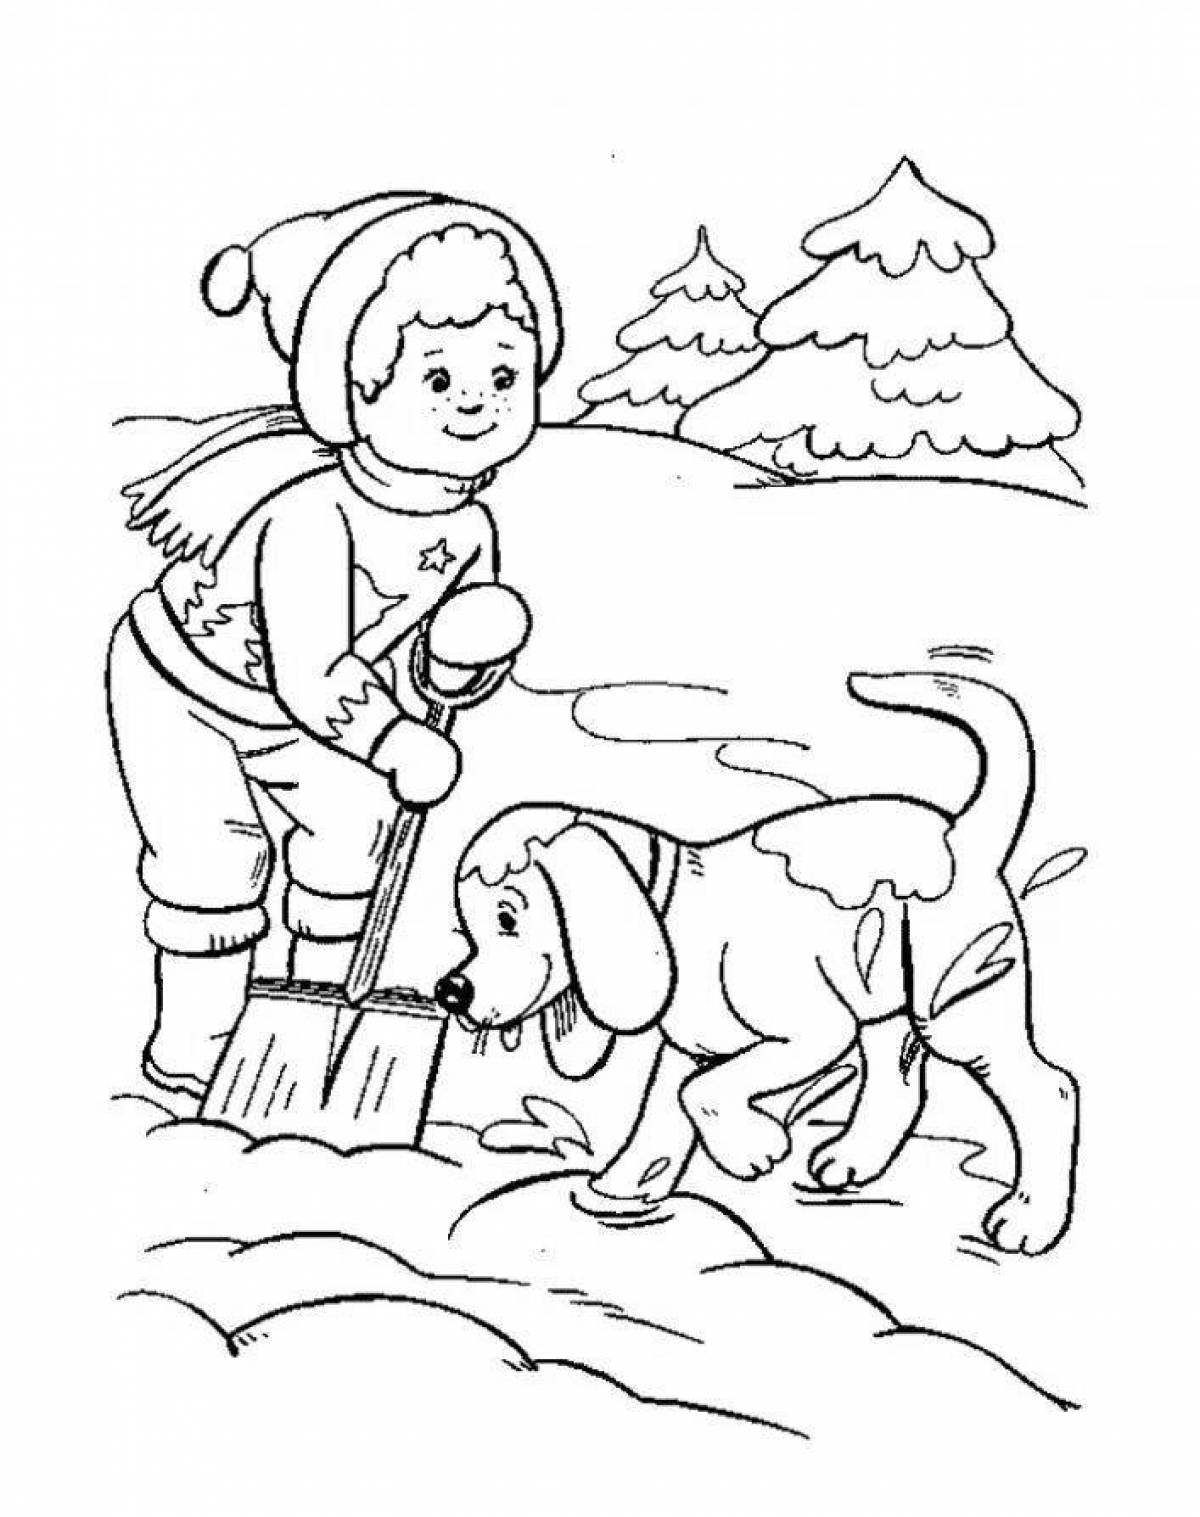 Brilliant coloring page of farm work in winter